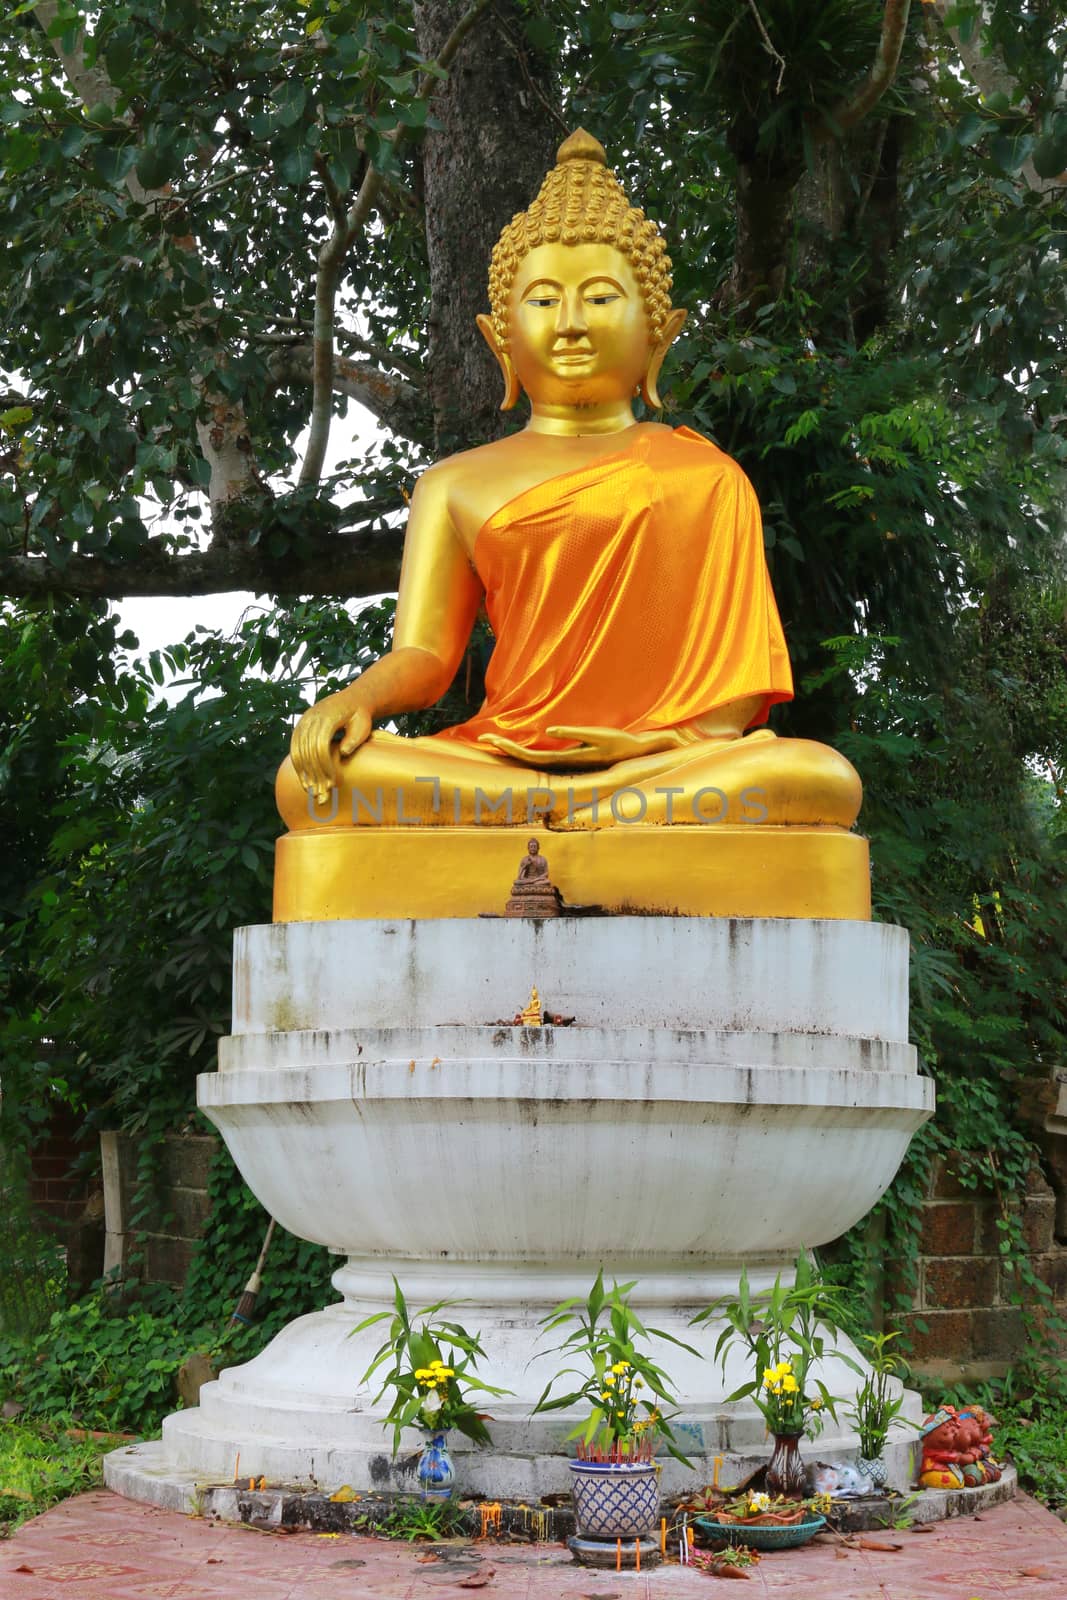 image of Buddha under the tree by kaidevil